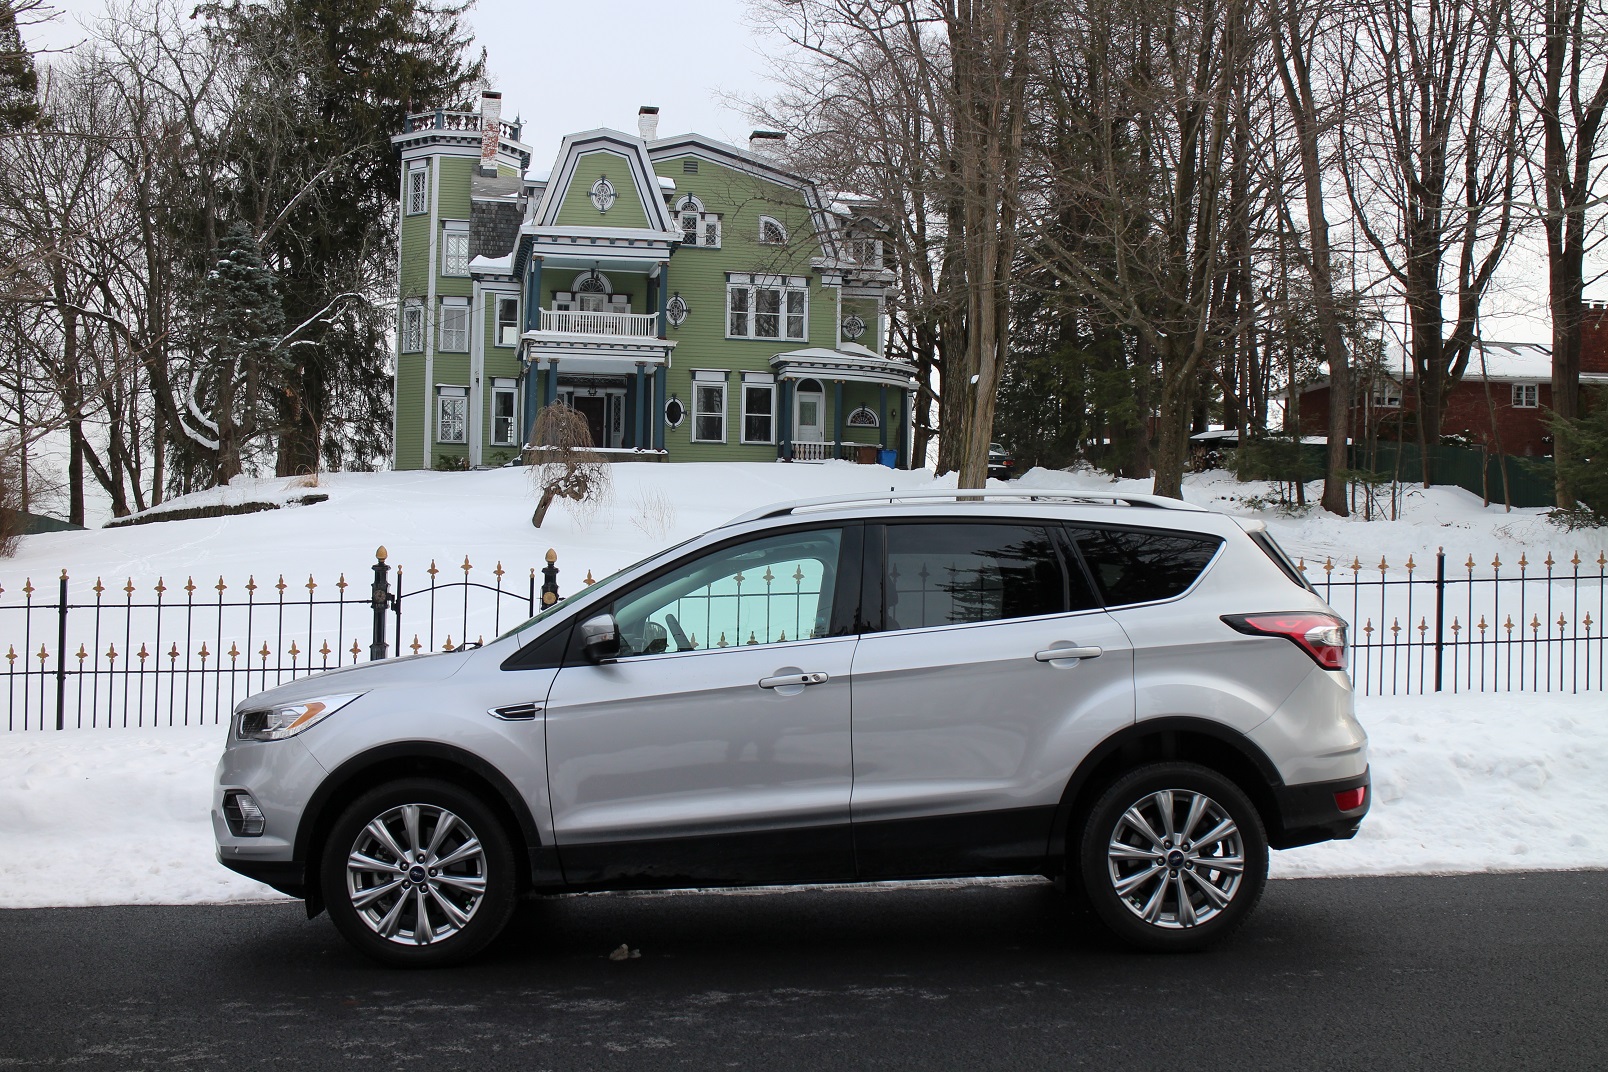 2017 Ford Escape AWD 1.5-liter gas mileage review